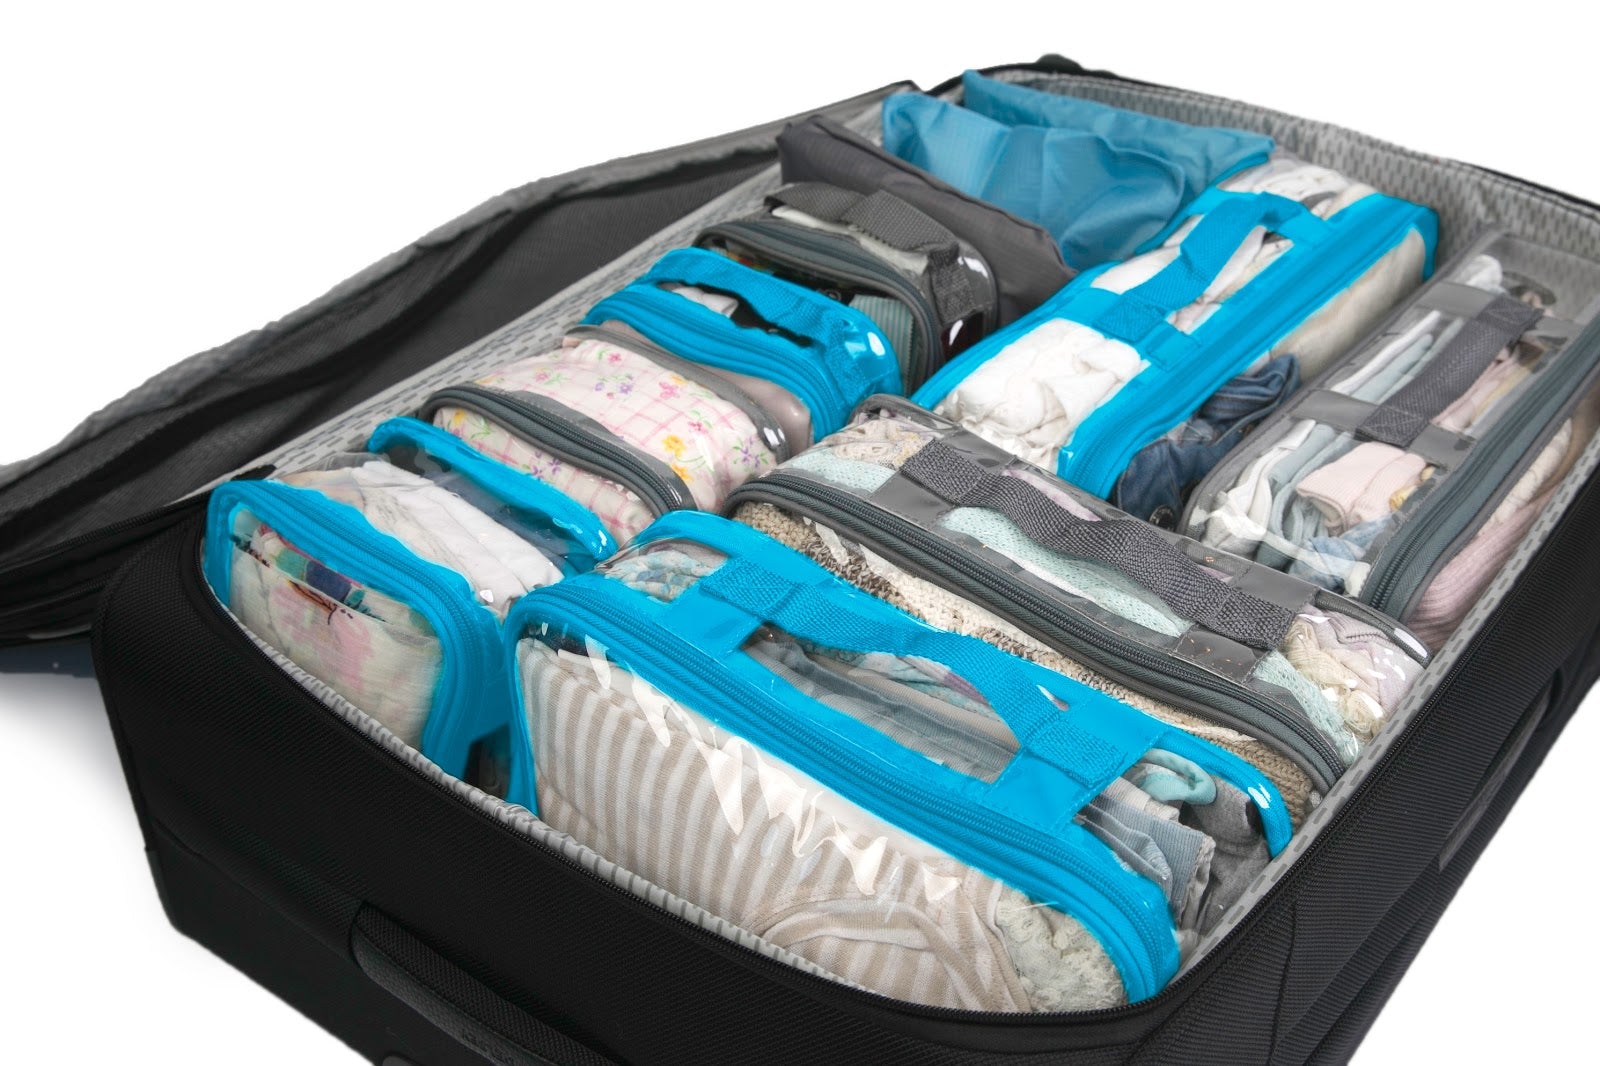 Best packing cubes for carry on luggage system for organization